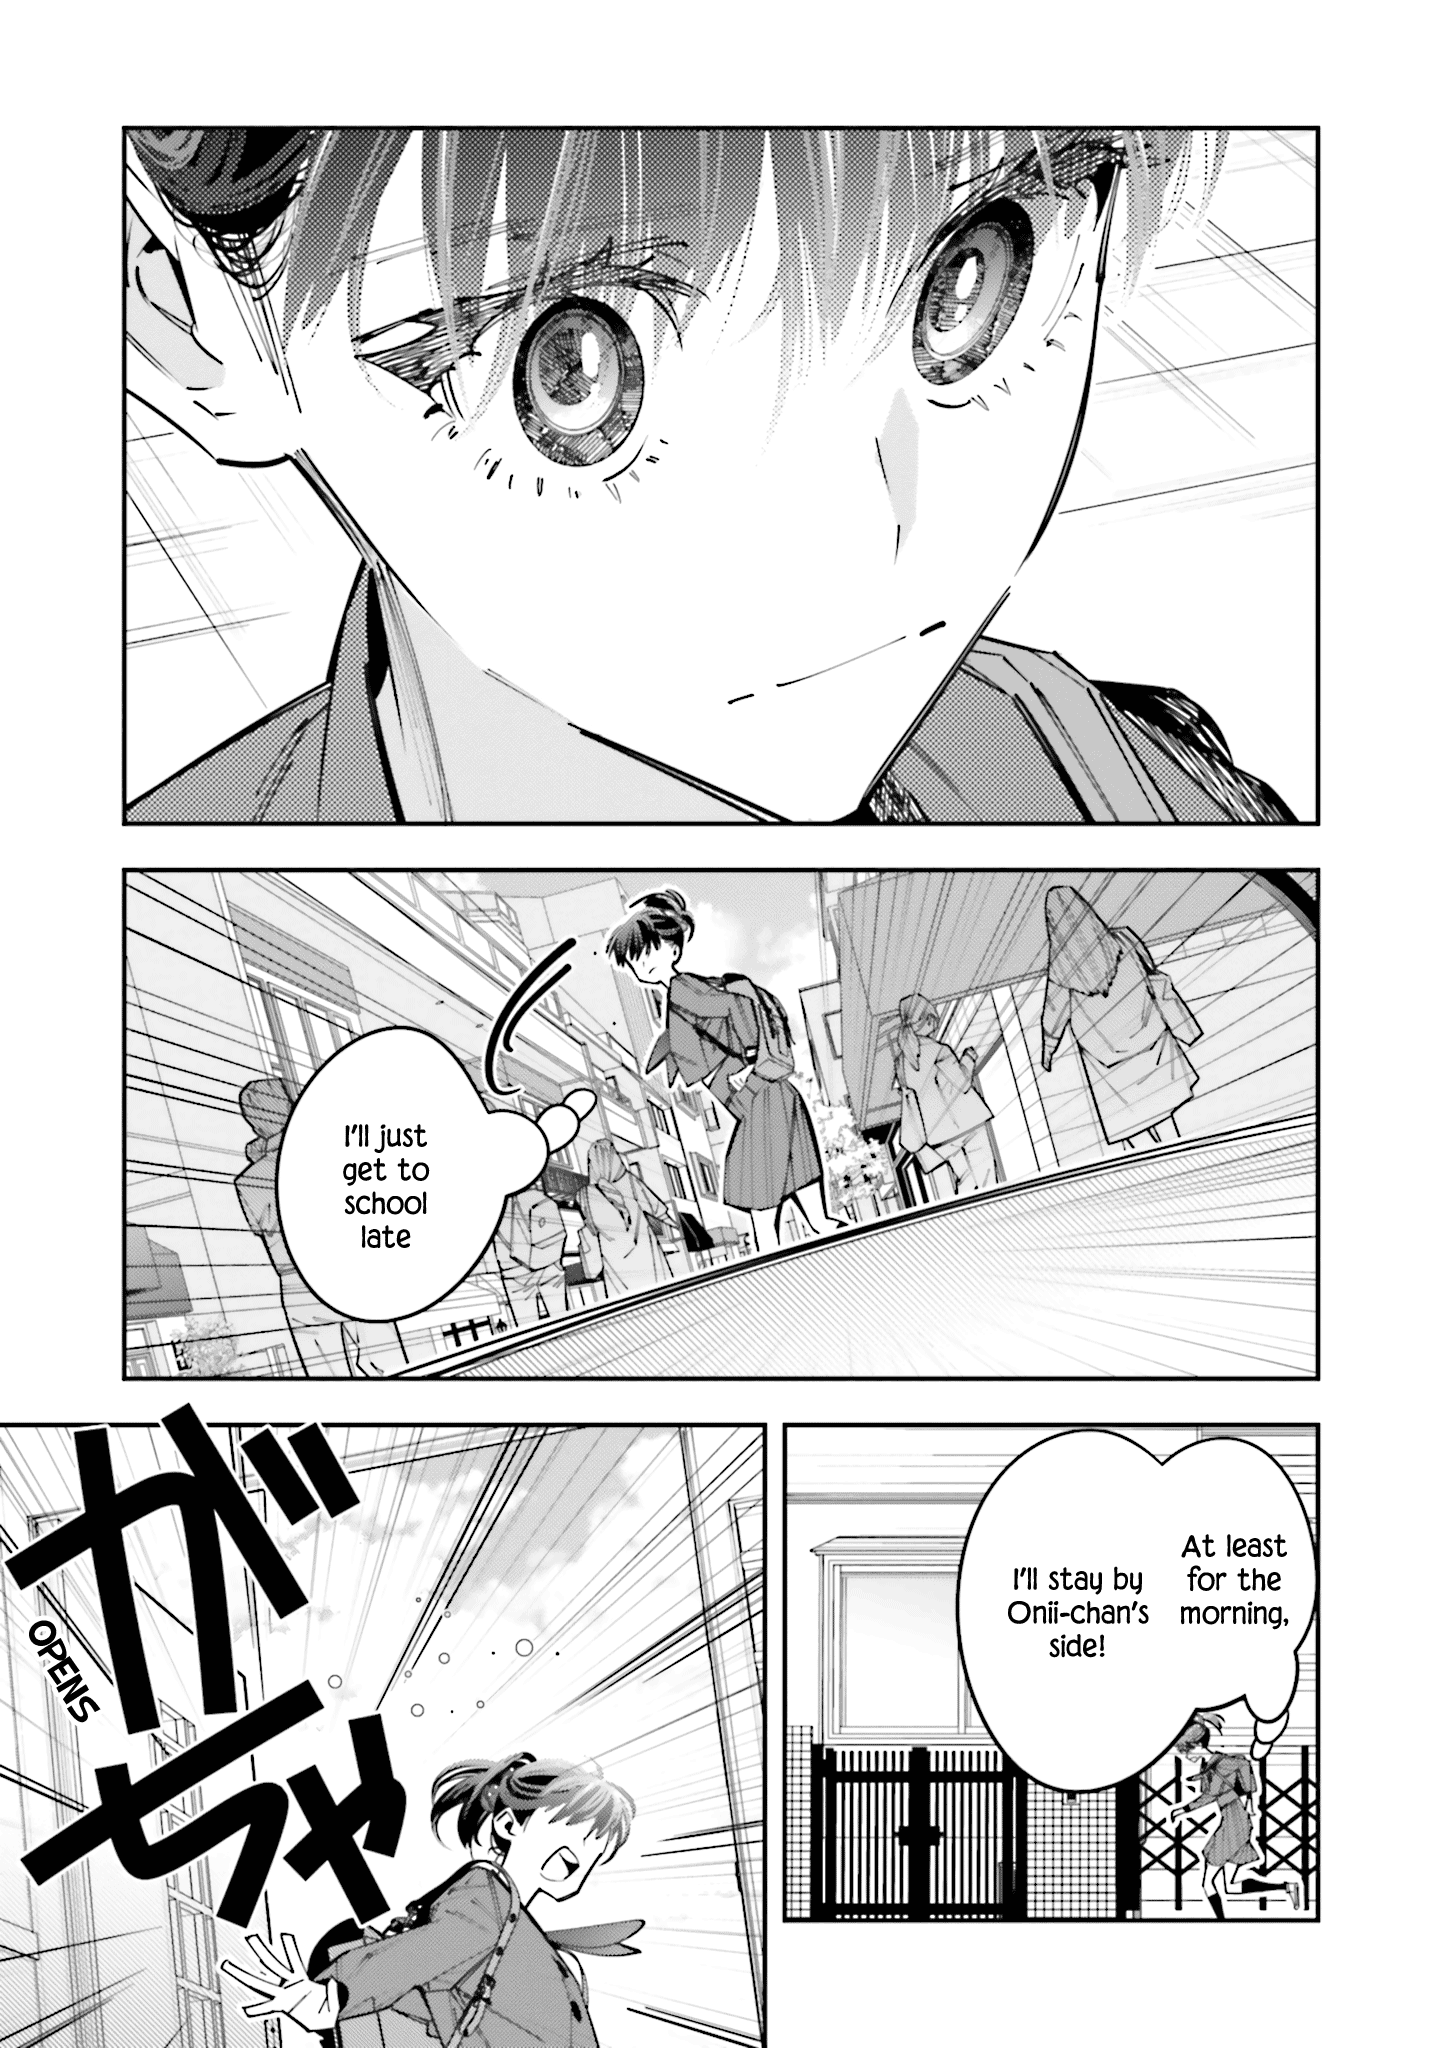 I Reincarnated As The Little Sister Of A Death Game Manga's Murder Mastermind And Failed Chapter 12 #9